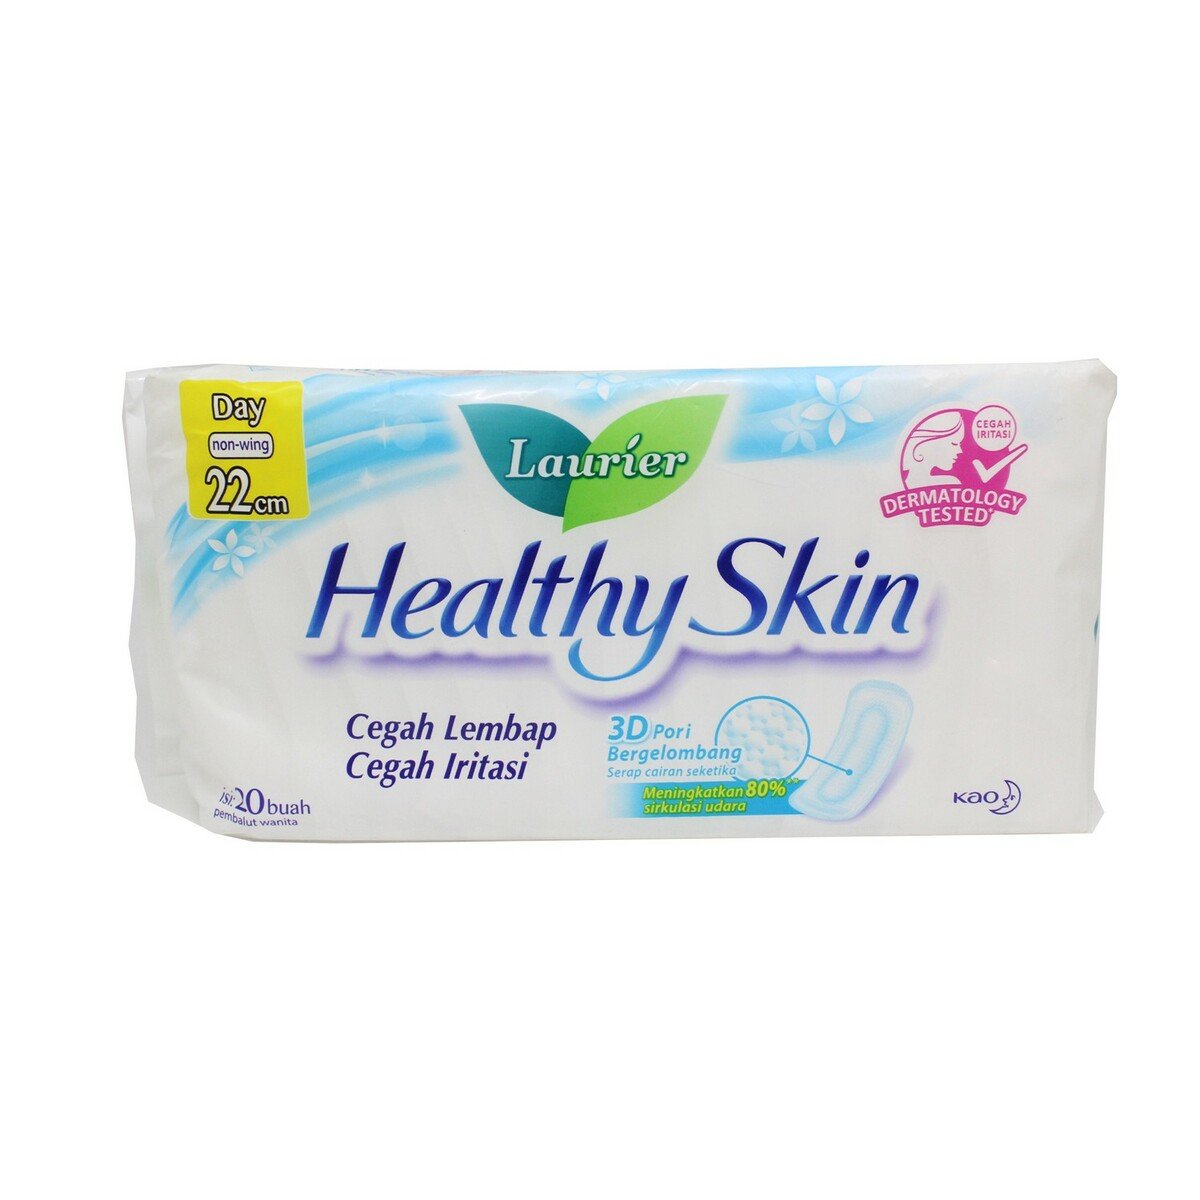 Laurier Healty Skin Non Wing 22cm 20pcs